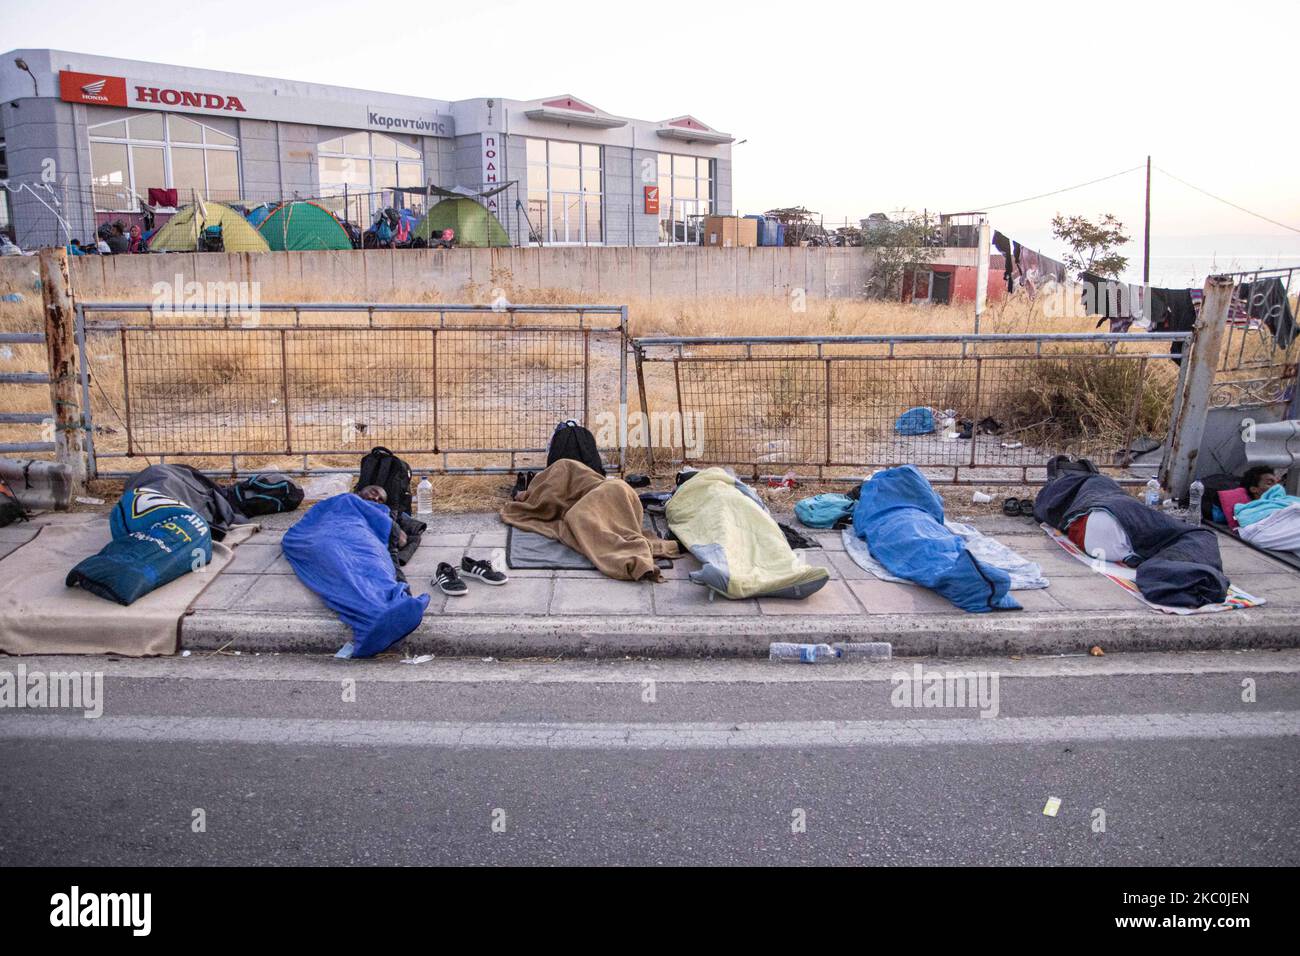 Refugees and migrants sleeping on the streets. Early morning with more than 10.000 Asylum Seekers sleep roadside after the fire in Moria Refugee Camp, the hotspot center for Identification and Registration. Homeless refugees and migrants without any shelter or facilities like toilets or running water live on the road between Mytilene or Mitlini city, the capital of the island and Moria, near Karatepe resulting the main road of the island to close, in makeshift tents as there was no place to accommodate them at that time, later the new temporary Kara Tepe or Mavrovouni Refugee camp was created. Stock Photo